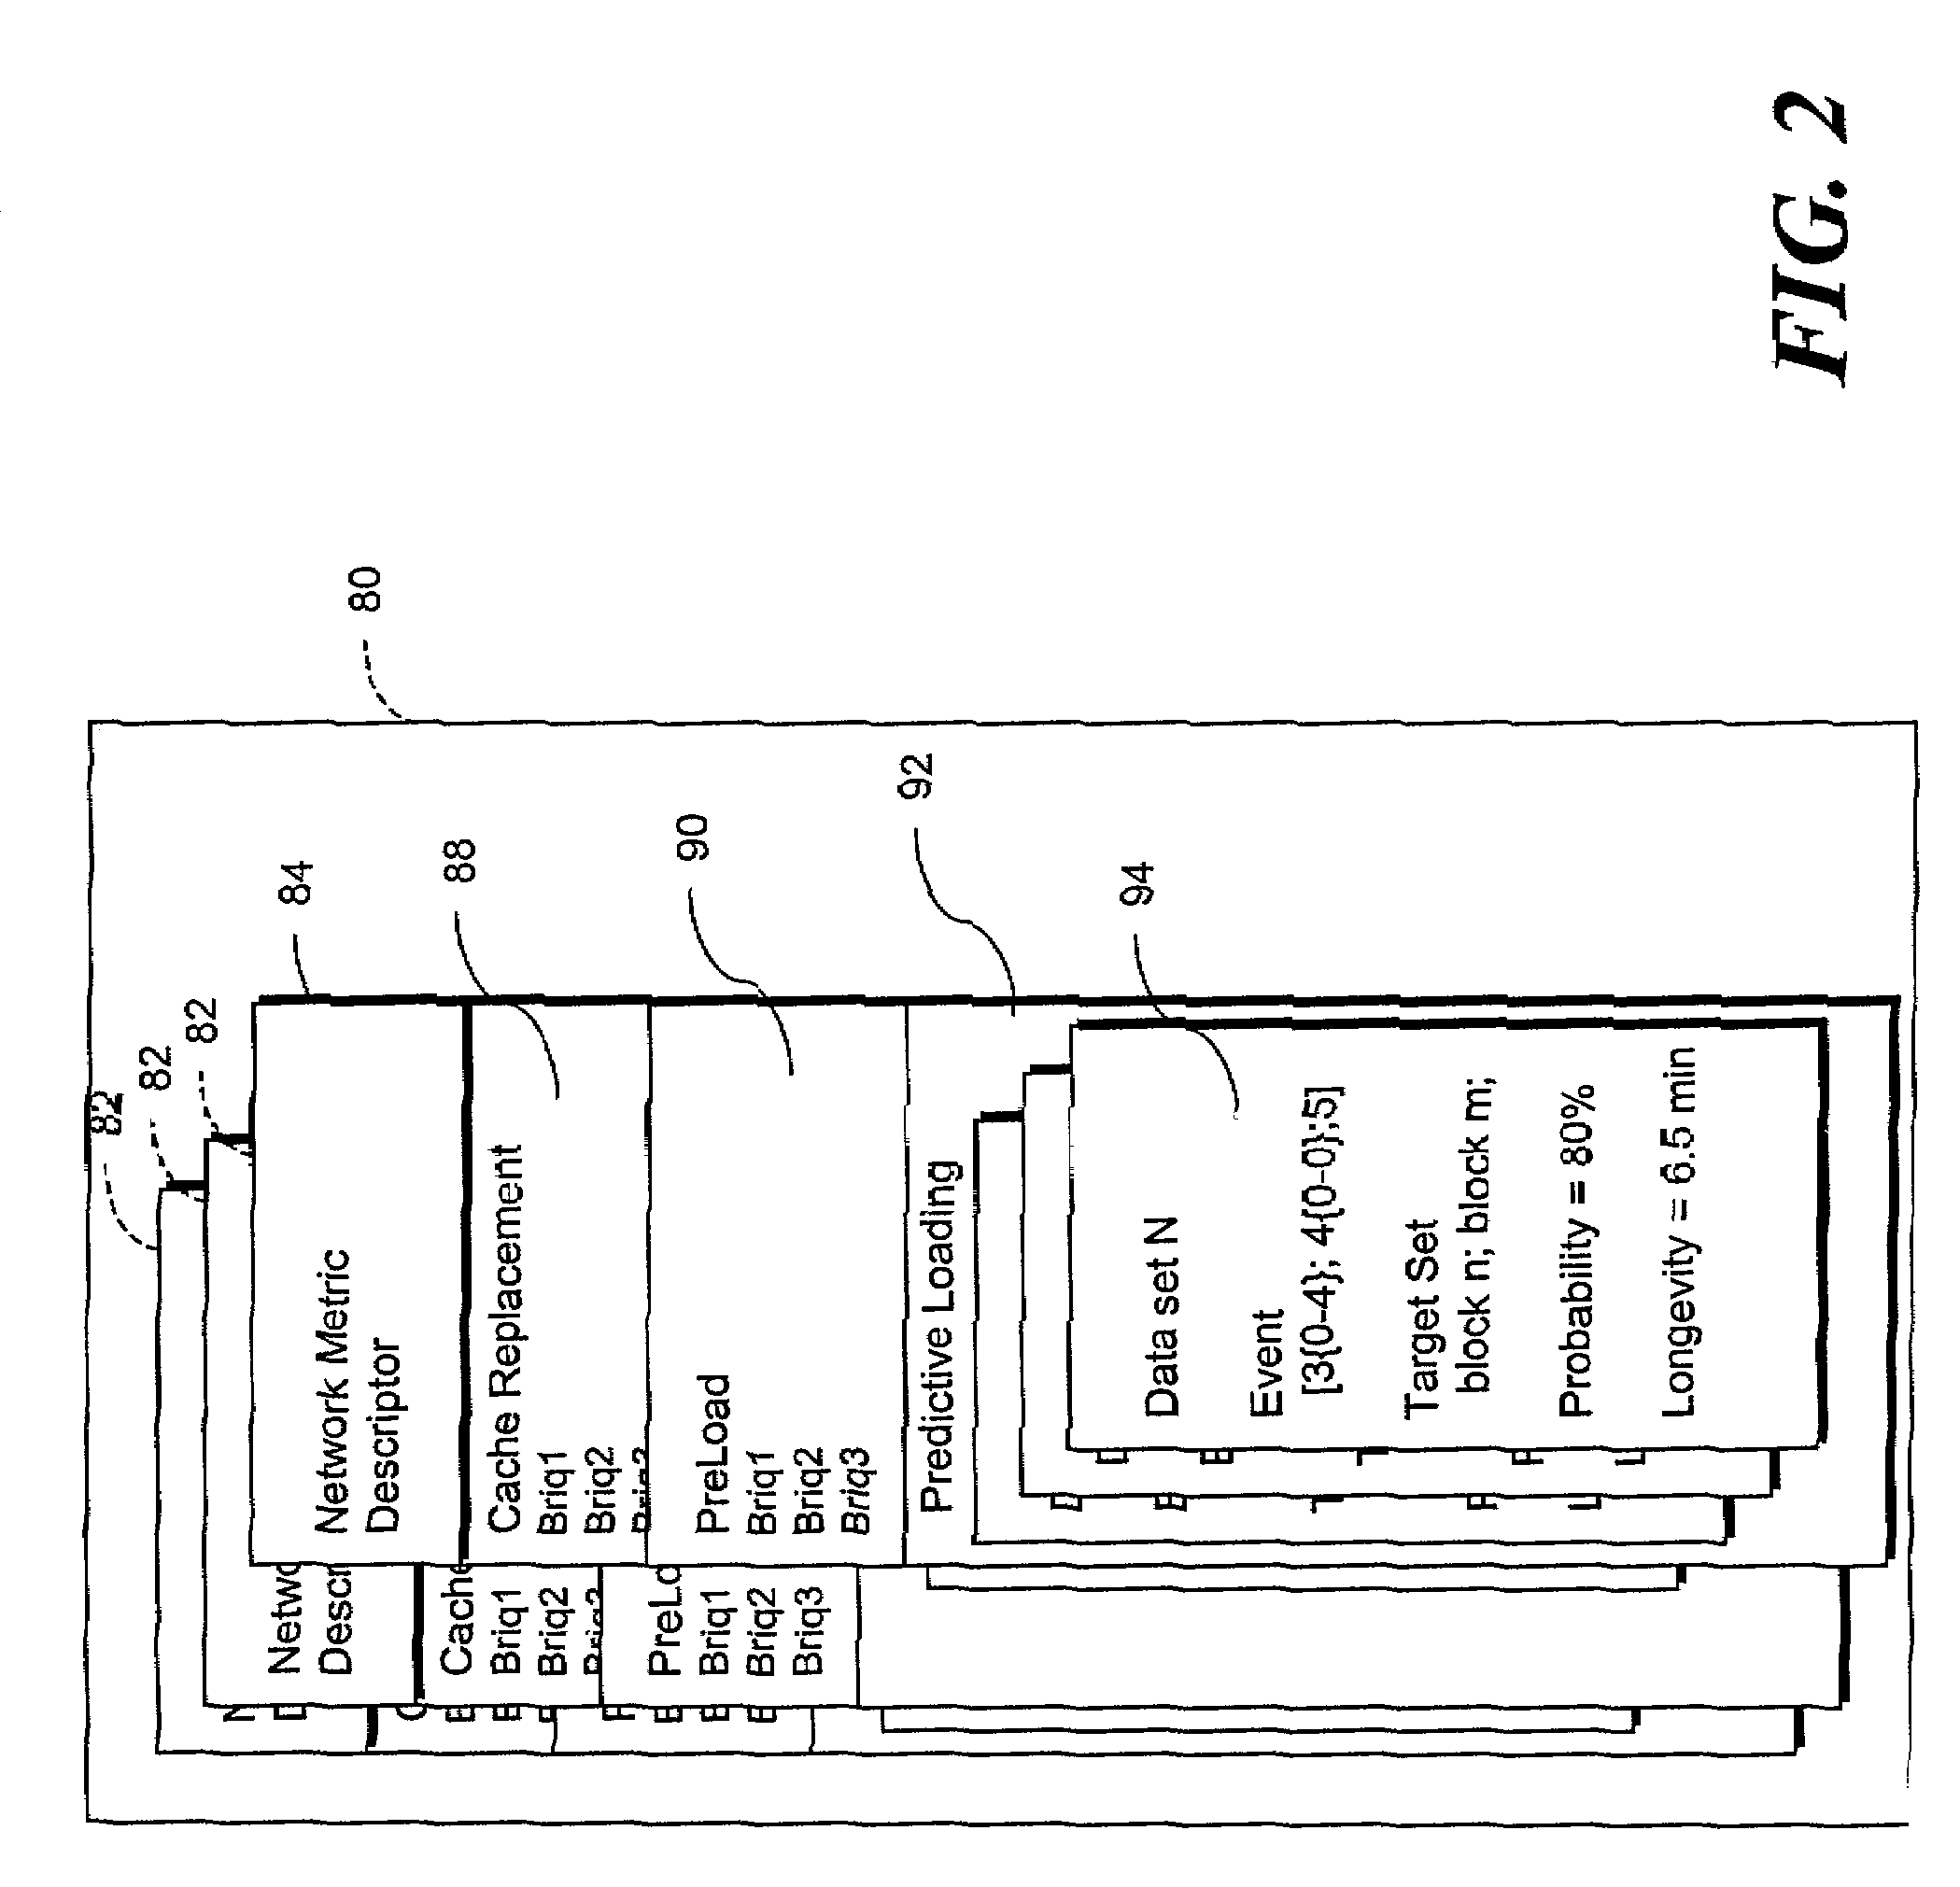 Systems and methods for delivering content over a computer network